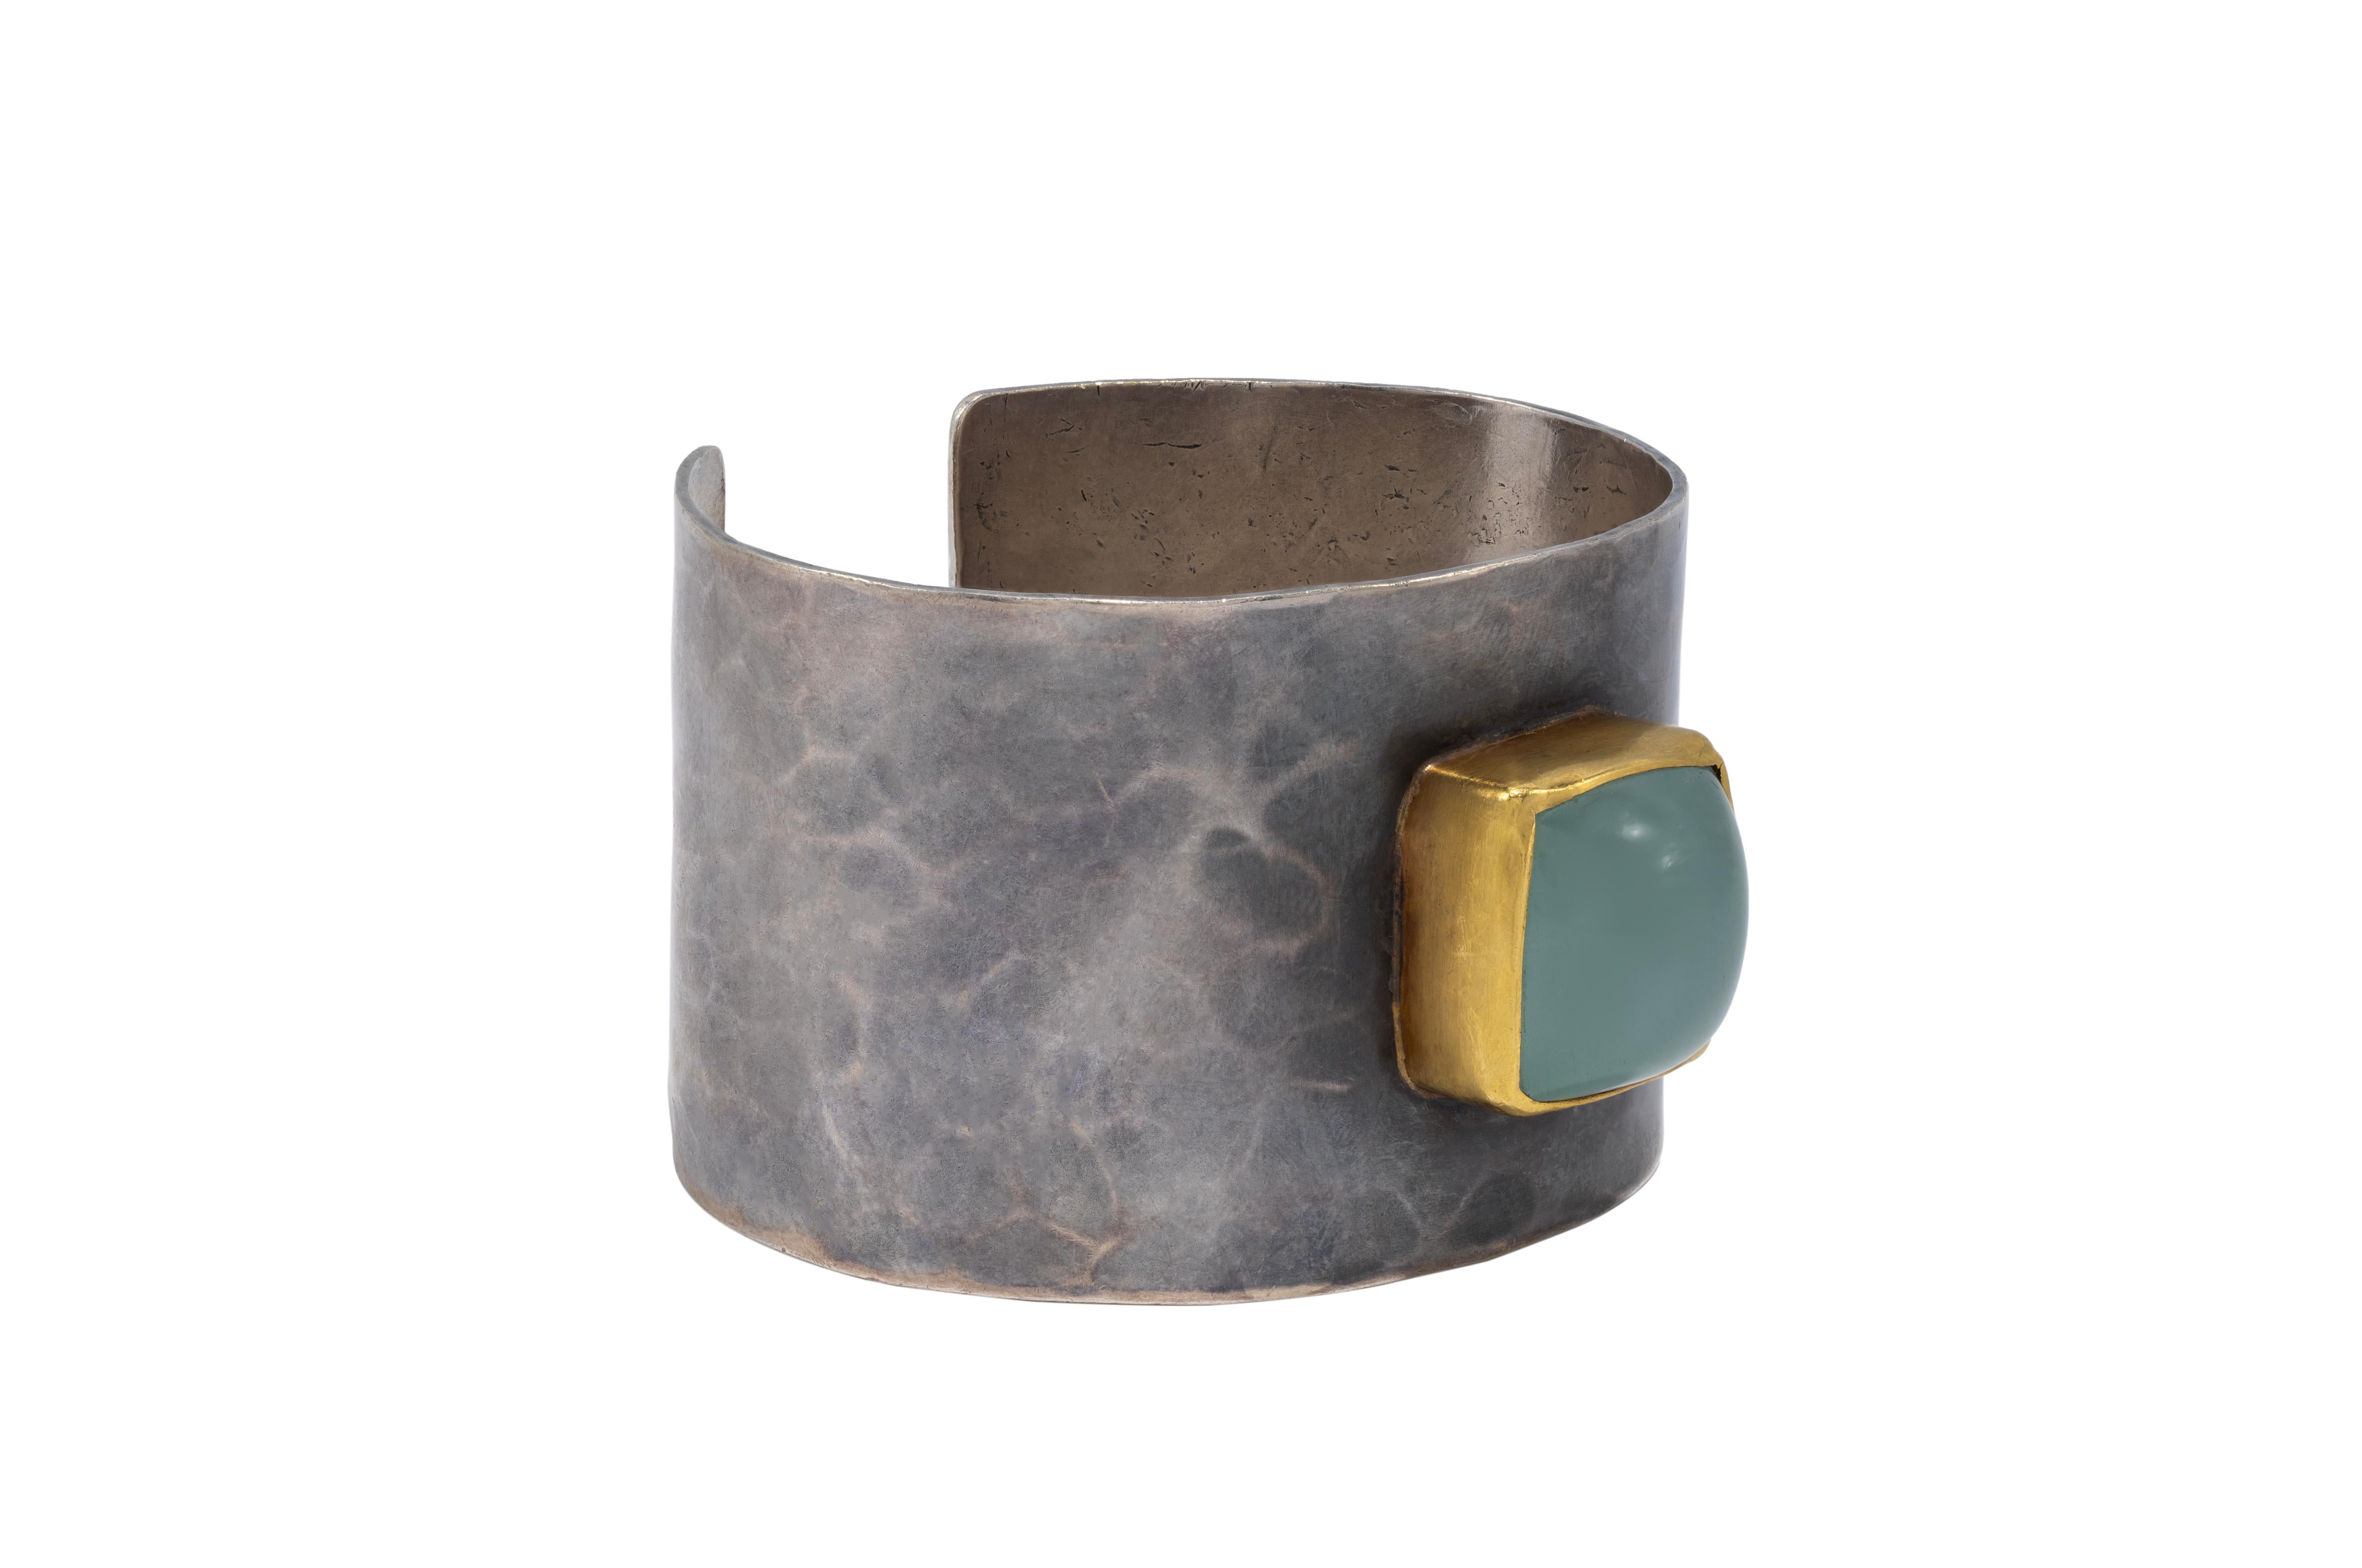 Sterling silver Goddess Cuff, blackened, hammered and distressed featuring a beautiful center Aqua stone set in 22k gold. Hand made, hand textured, one of a kind. Classic and sophisticated with a modern twist. Our goal is to feel powerful, beautiful